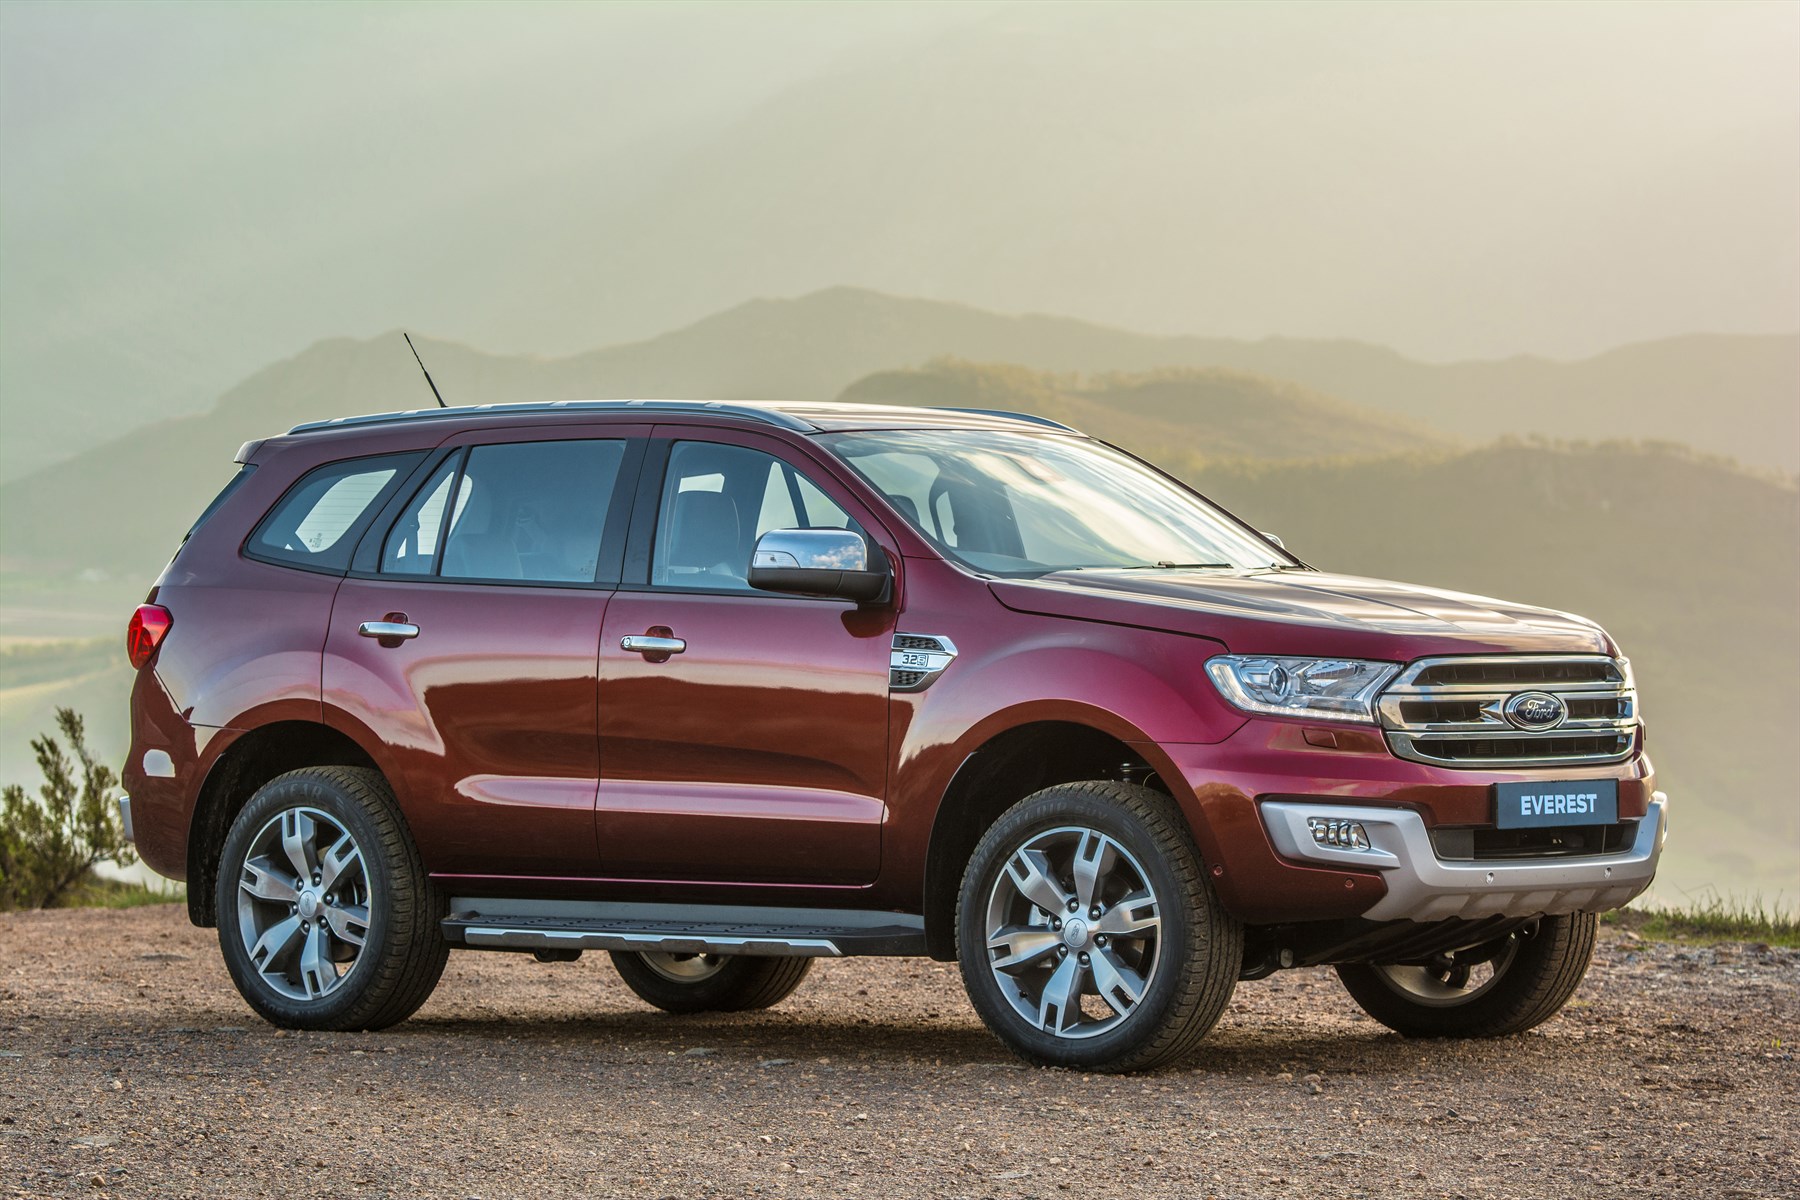 HQ Ford Everest Wallpapers | File 417.86Kb